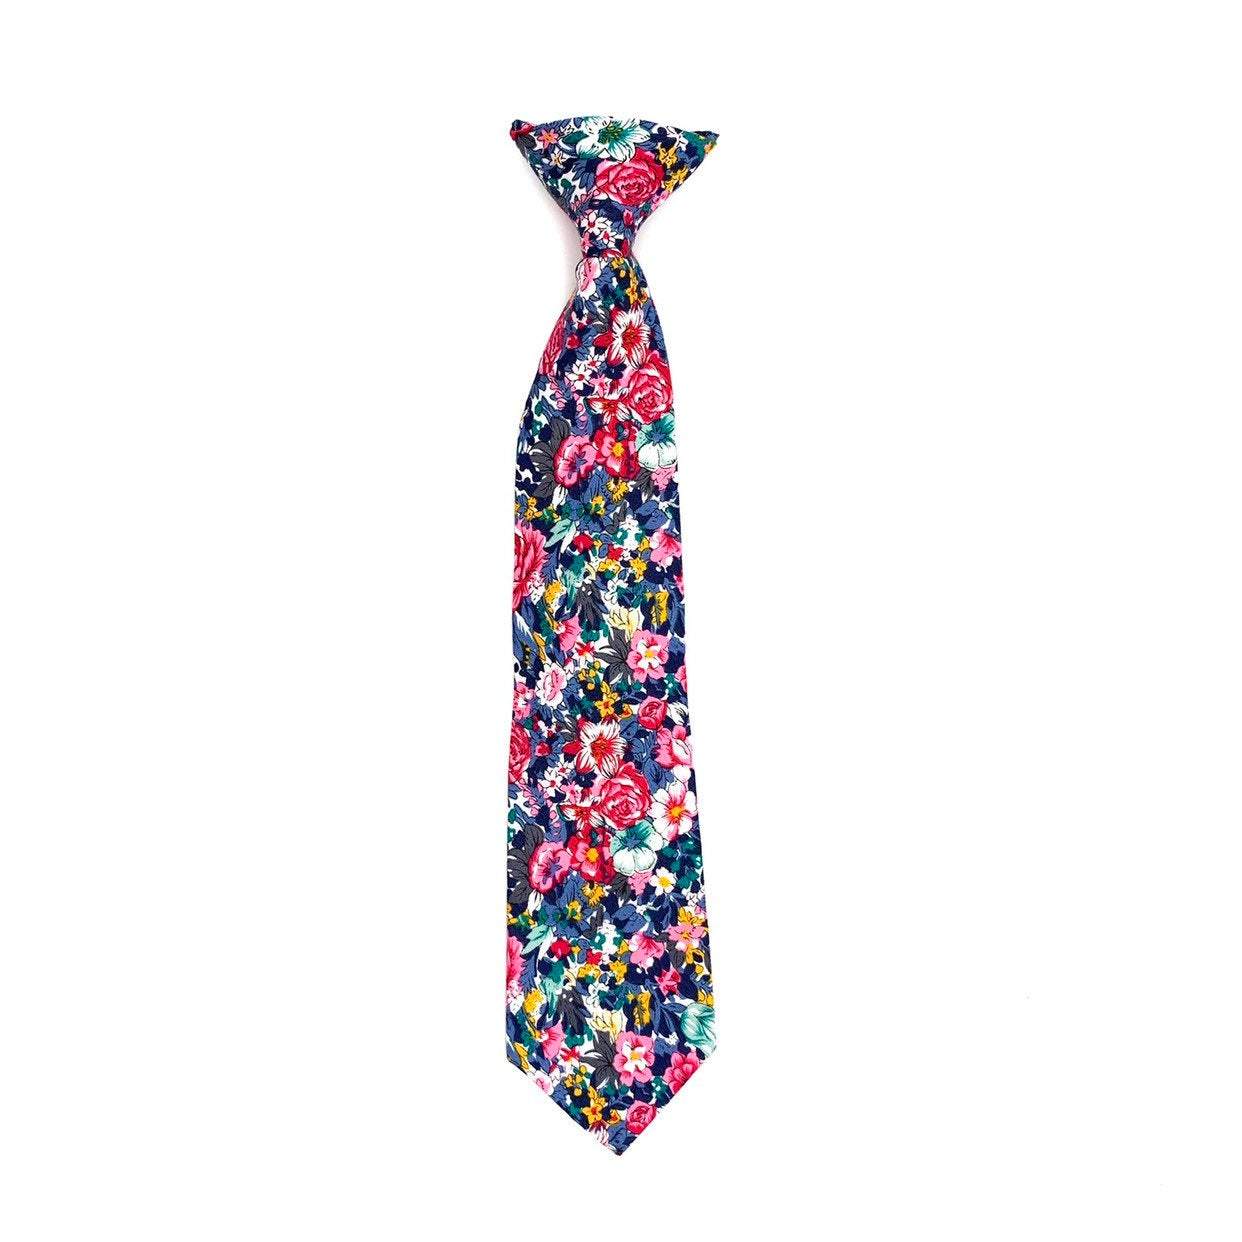 Pink Boys Floral Clip On Tie 2.3&quot; ROBERT MYTIESHOP-Material:Cotton Blend Approx Size: Max width: 6.5 cm / 2.4 inches 9-24 months 26 CM2-5 years 31 CM9-11 Years 43 CM Great for: Groom Groomsmen Wedding Shoots Formal Prom Fancy Parties Gifts and presents-Mytieshop